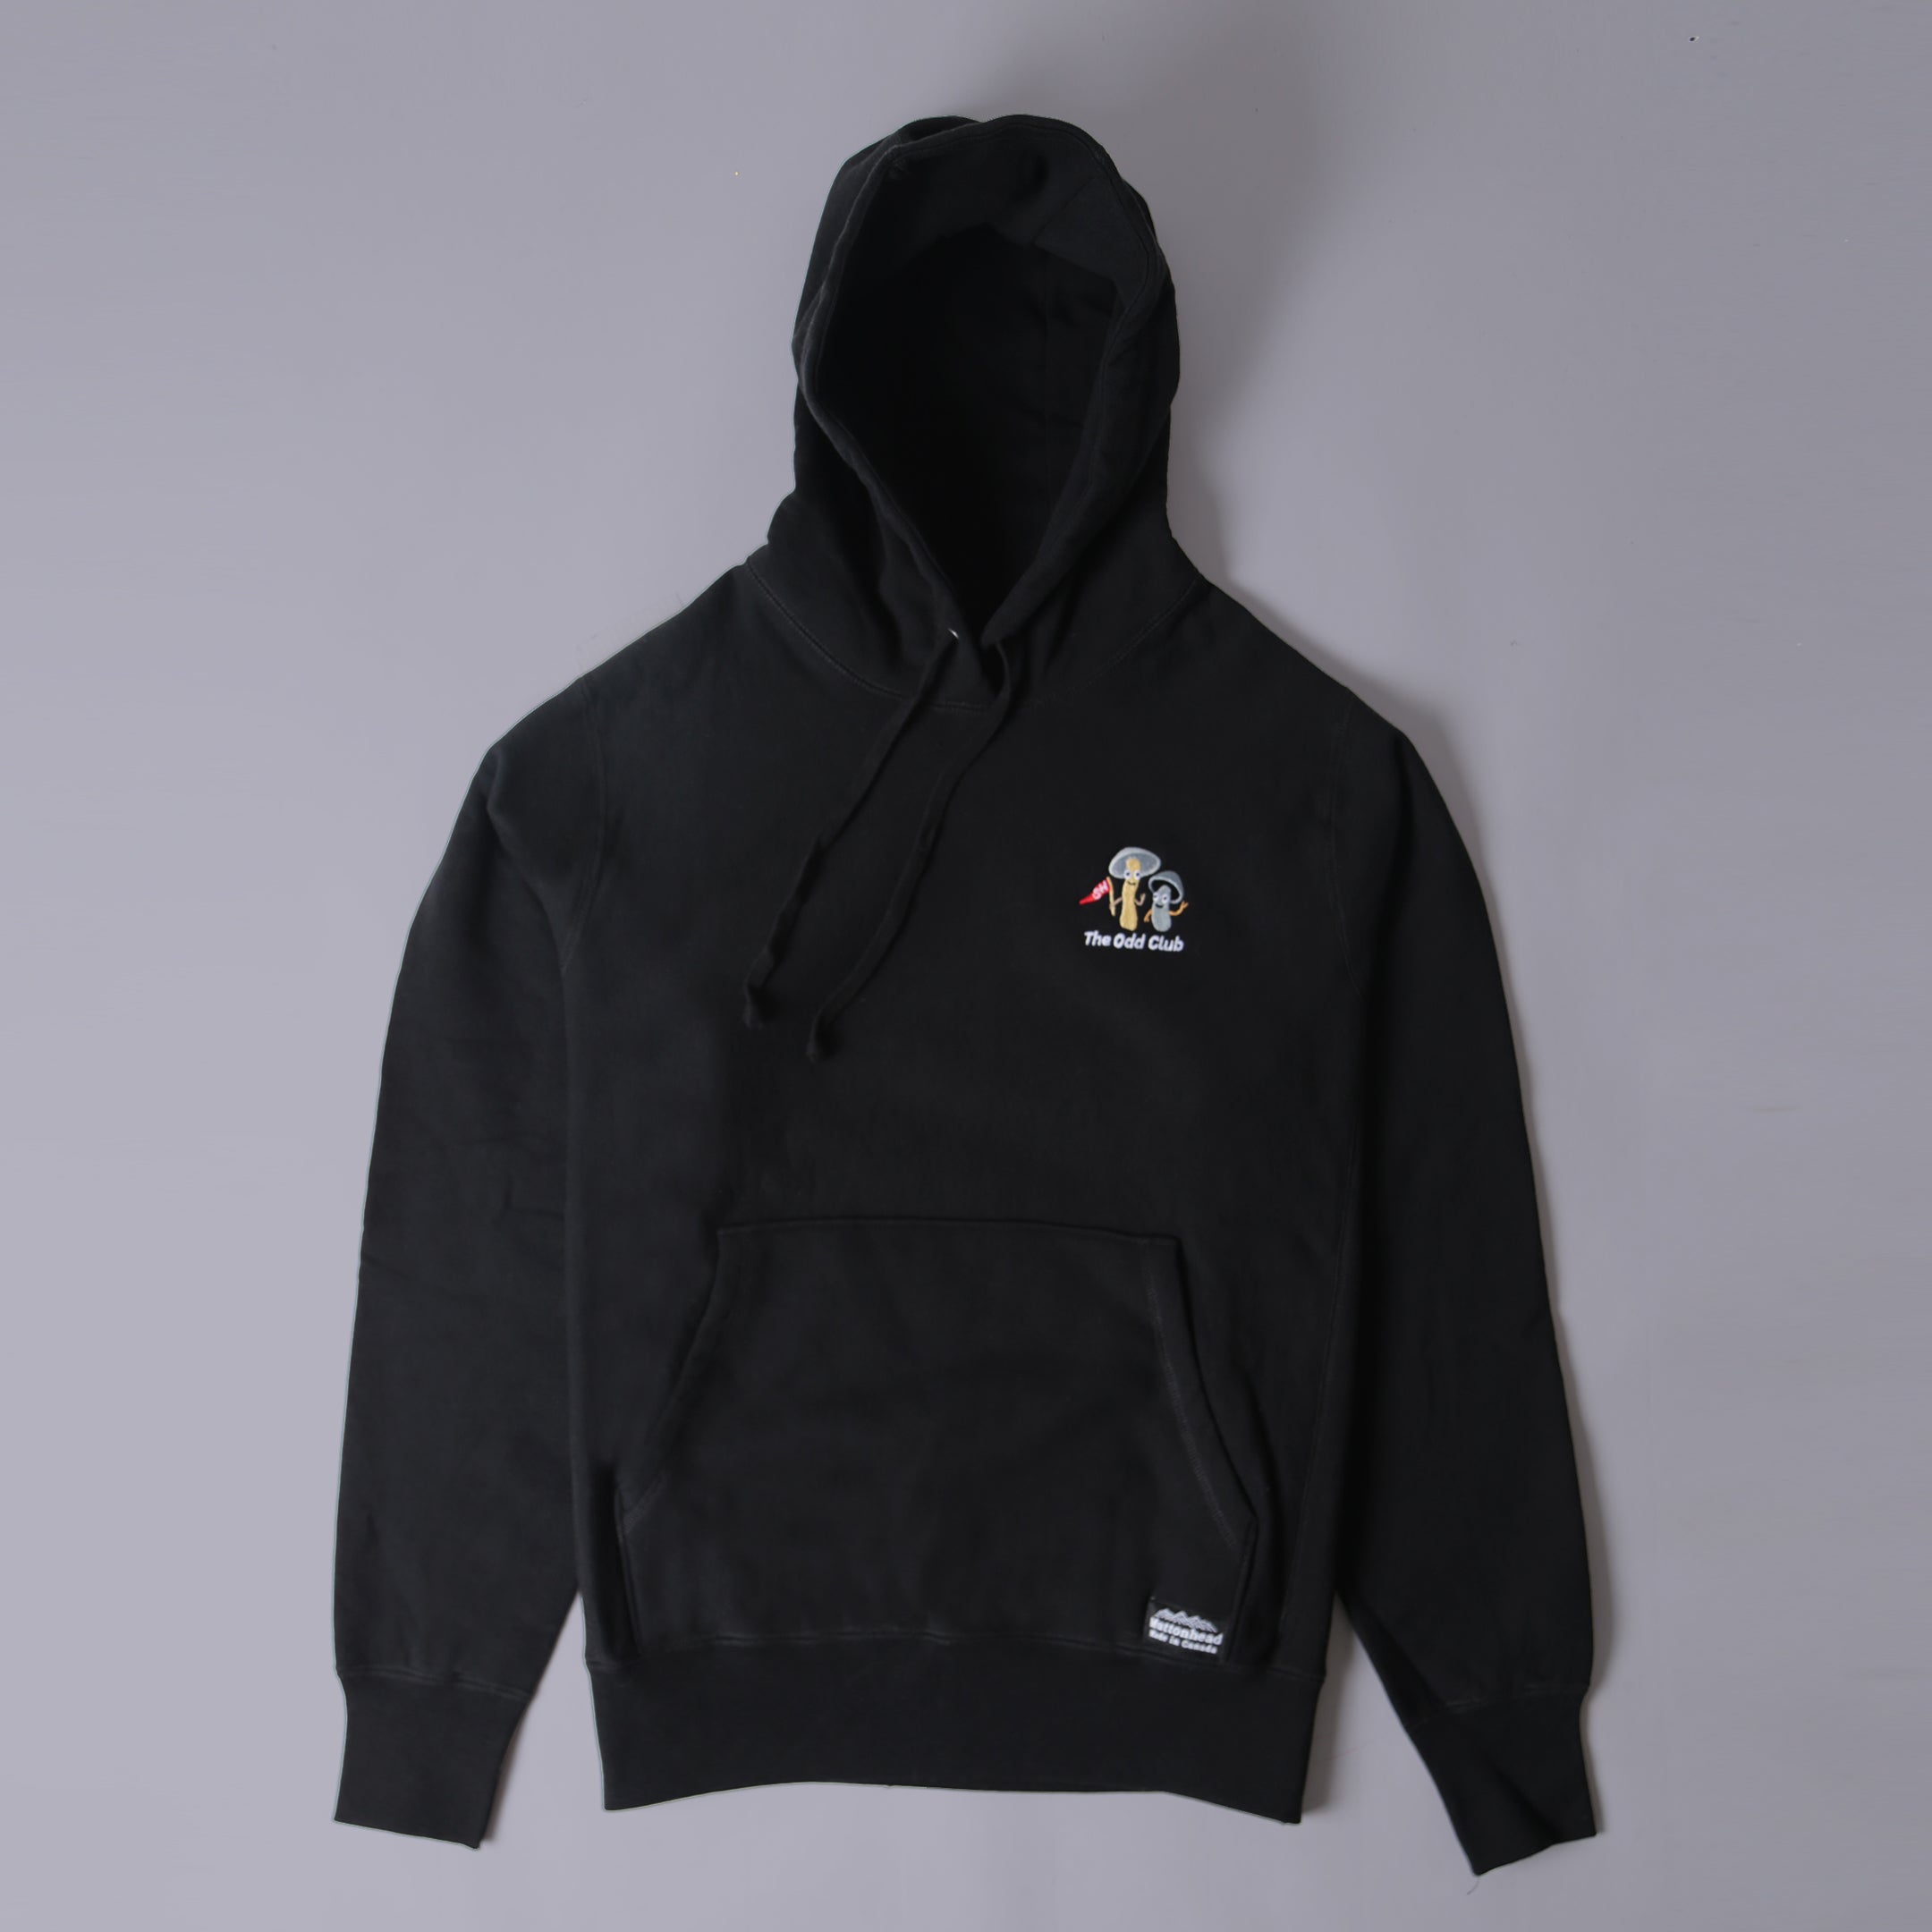 Pullover Cabin Hoodie - Black - The Odd Club - Second Harvest Series